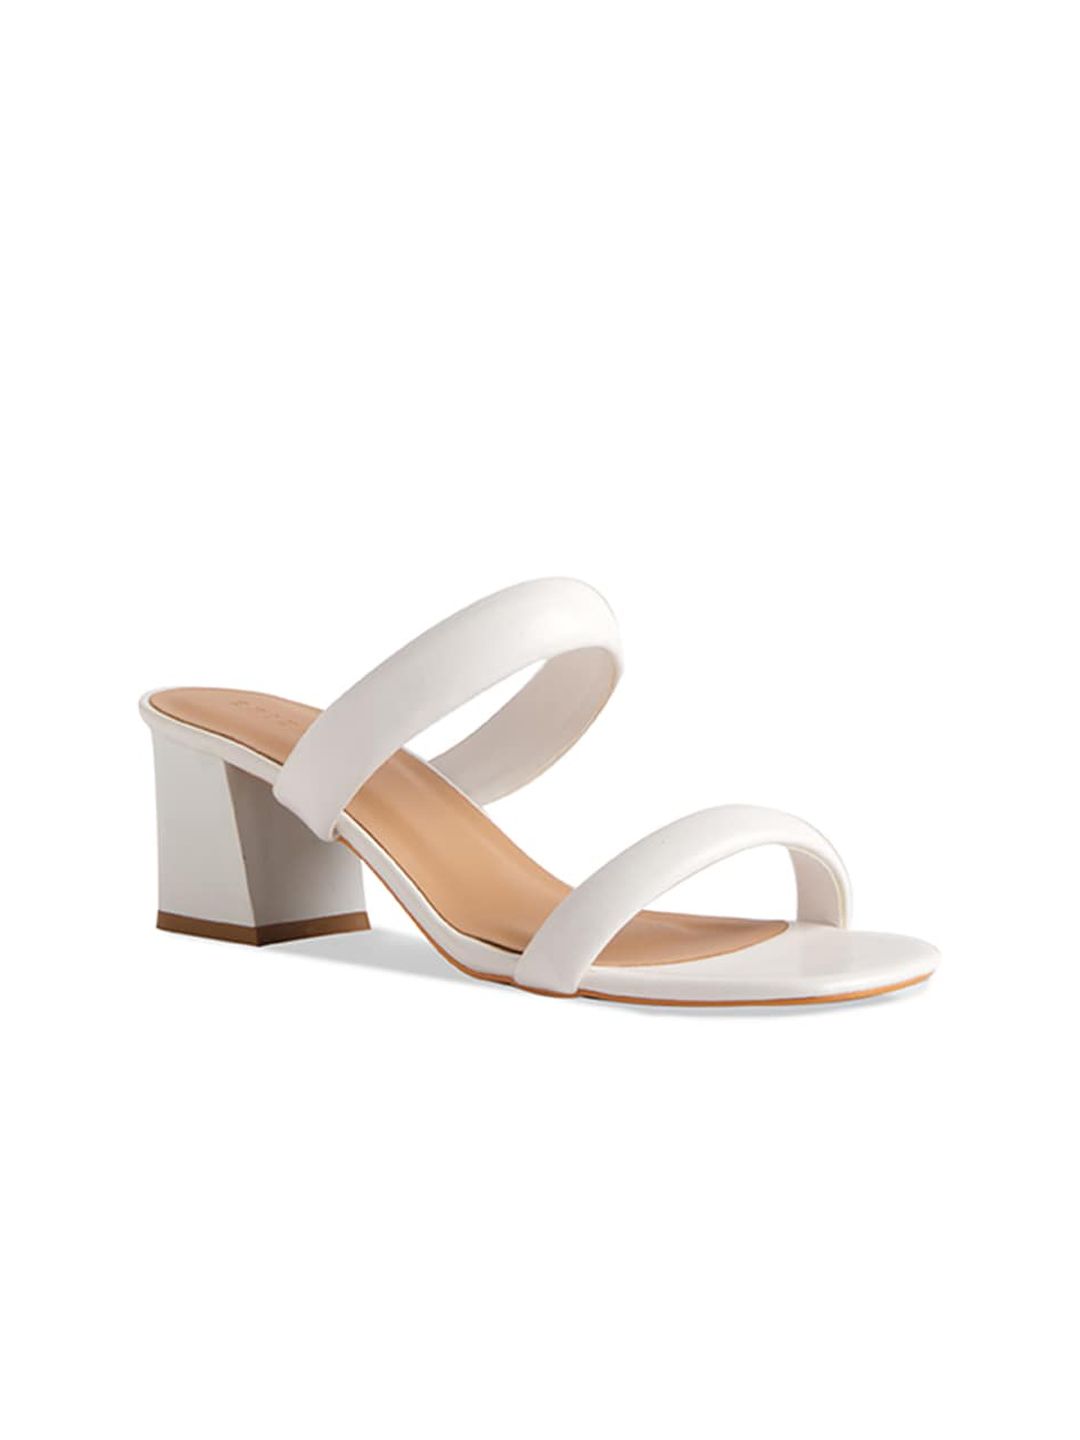 ERIDANI White Block Sandals with Buckles Price in India